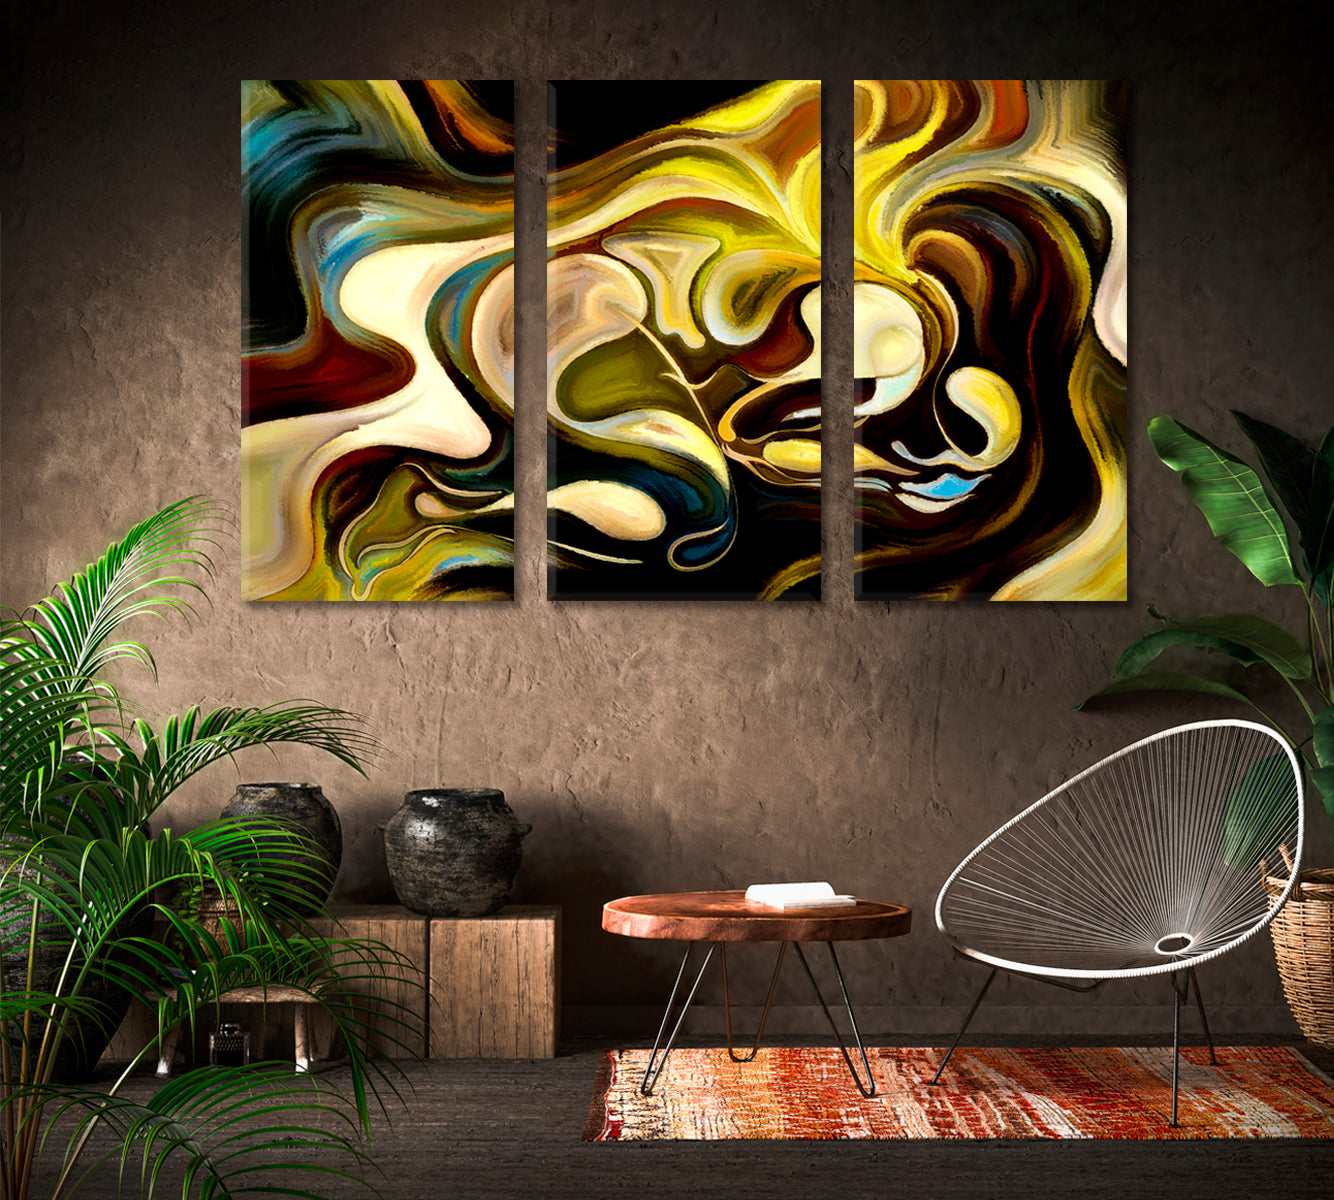 Flowing Curves Vivid Abstraction Contemporary Art Artesty 3 panels 36" x 24" 